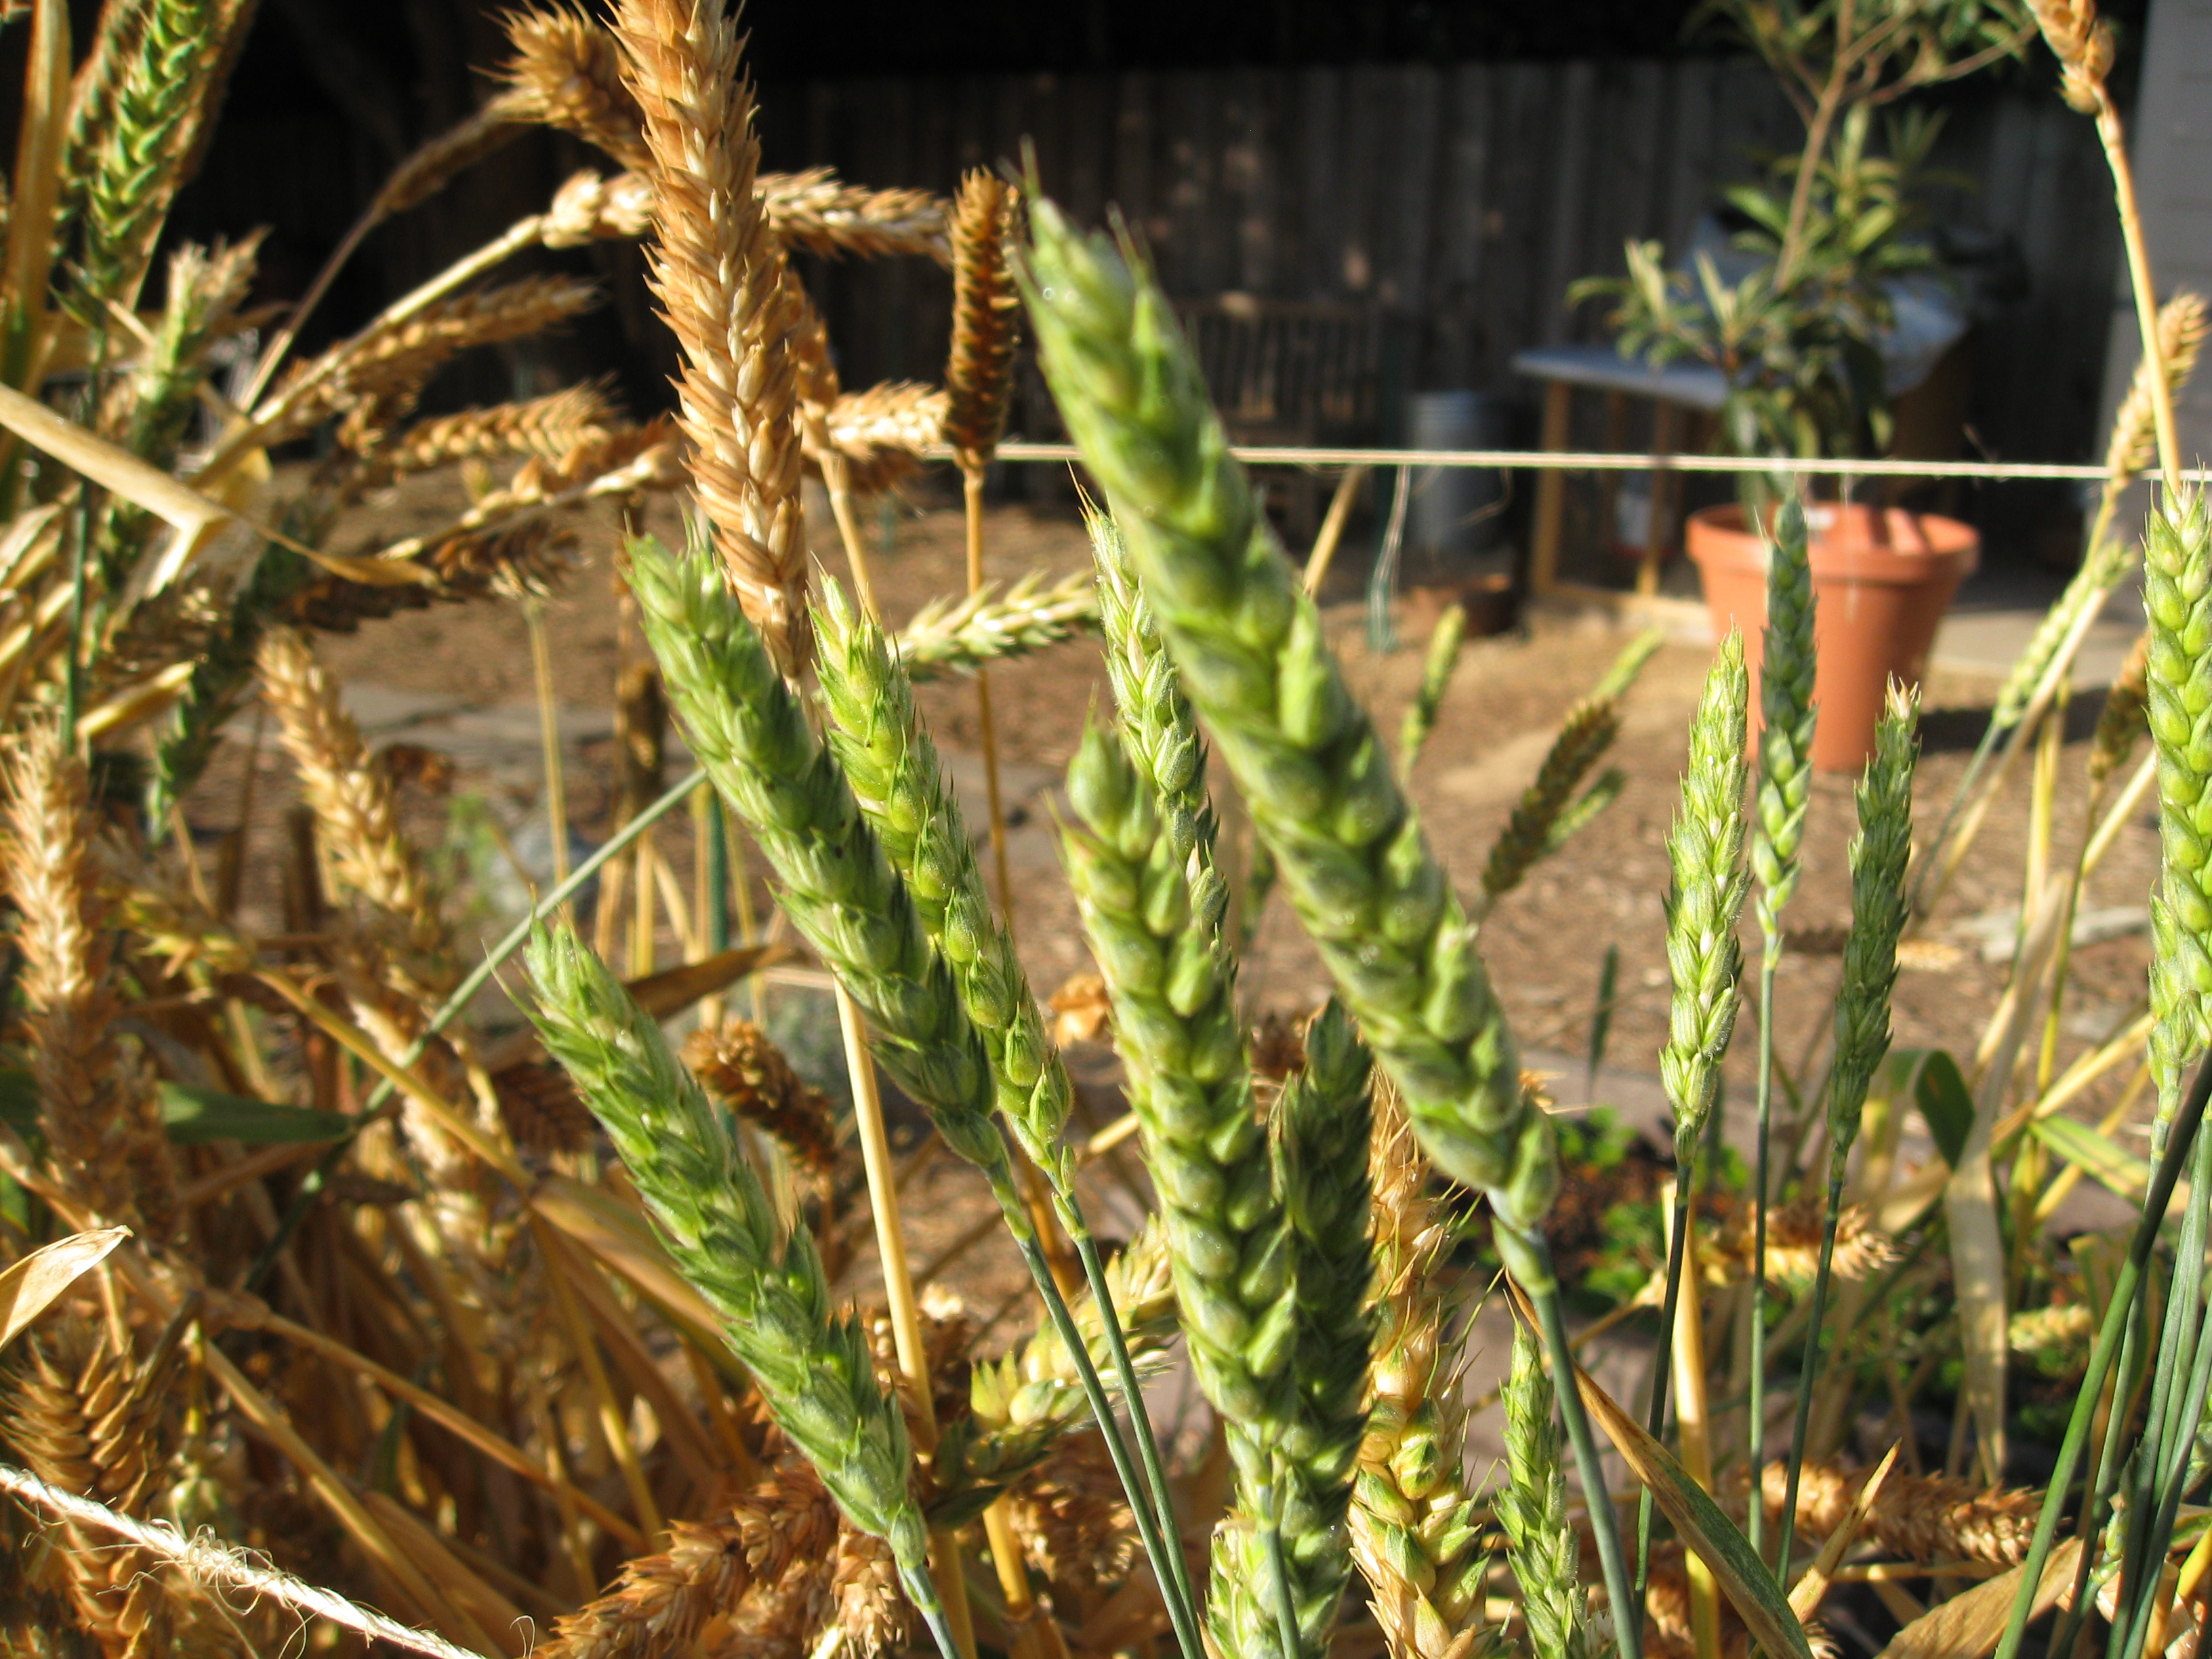 White Sonora Wheat grows green, then dries to golden brown.